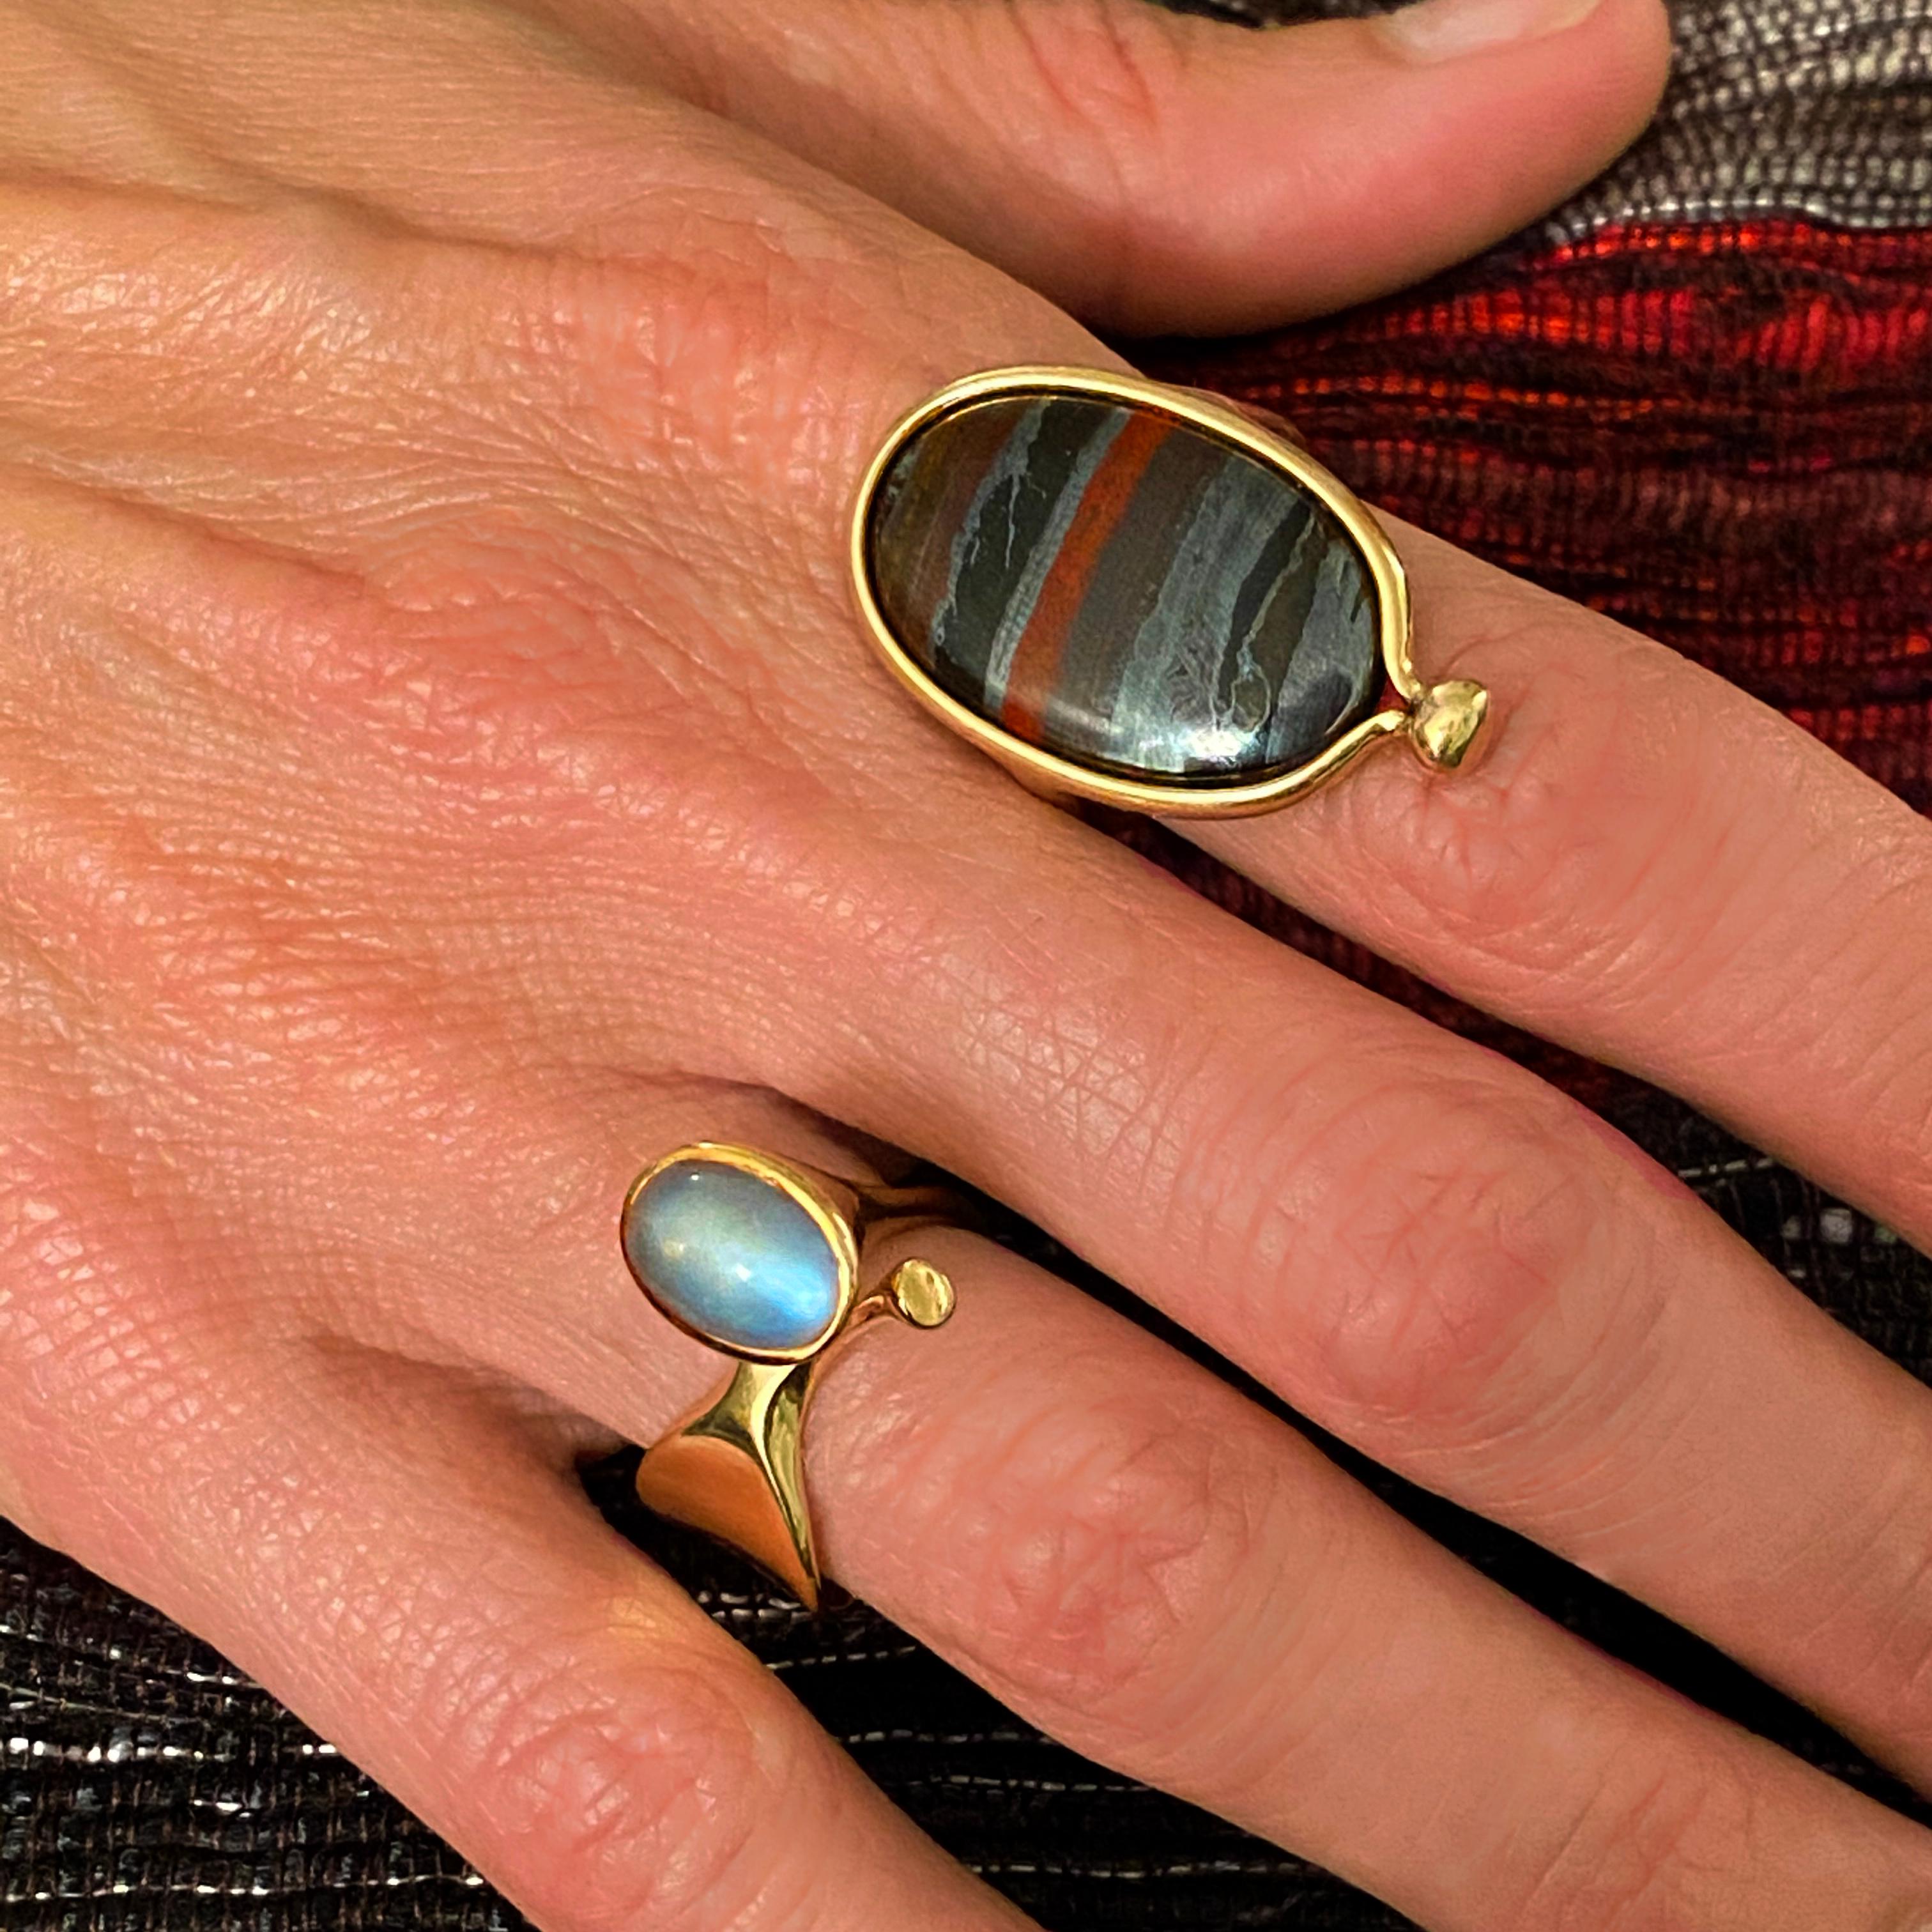 A cat's eye moonstone and 18 karat gold ring, by Vivianna Torun for Georg Jensen, 1960s. The ring is stamped Georg Jensen 18K 750 Torun 915 Denmark. Size 6.50. 

Vivianna Torun was a Swedish silversmith and master jeweler, known for her exquisite